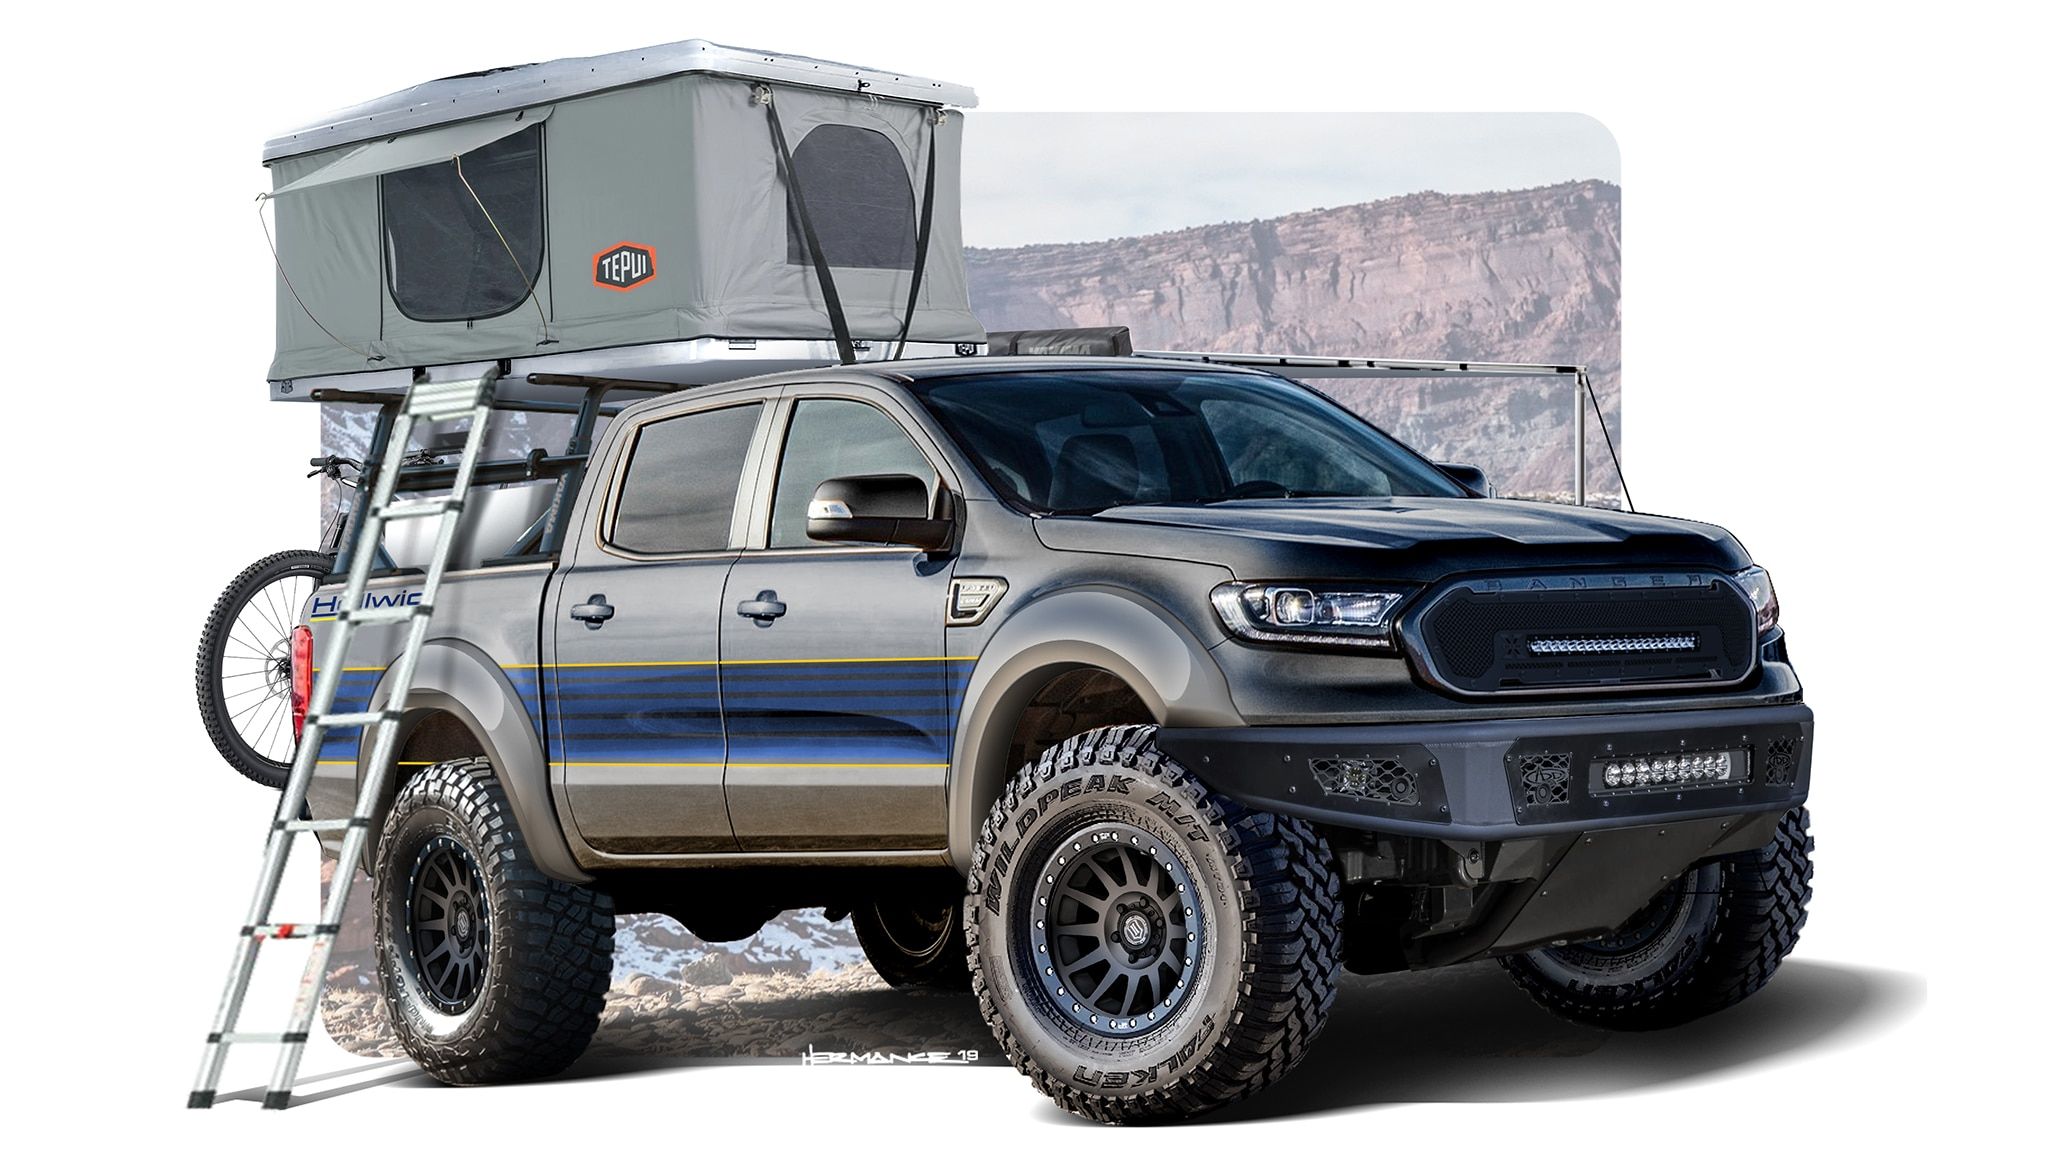 These are the Custom Ford Ranger Project Trucks of SEMA 2019